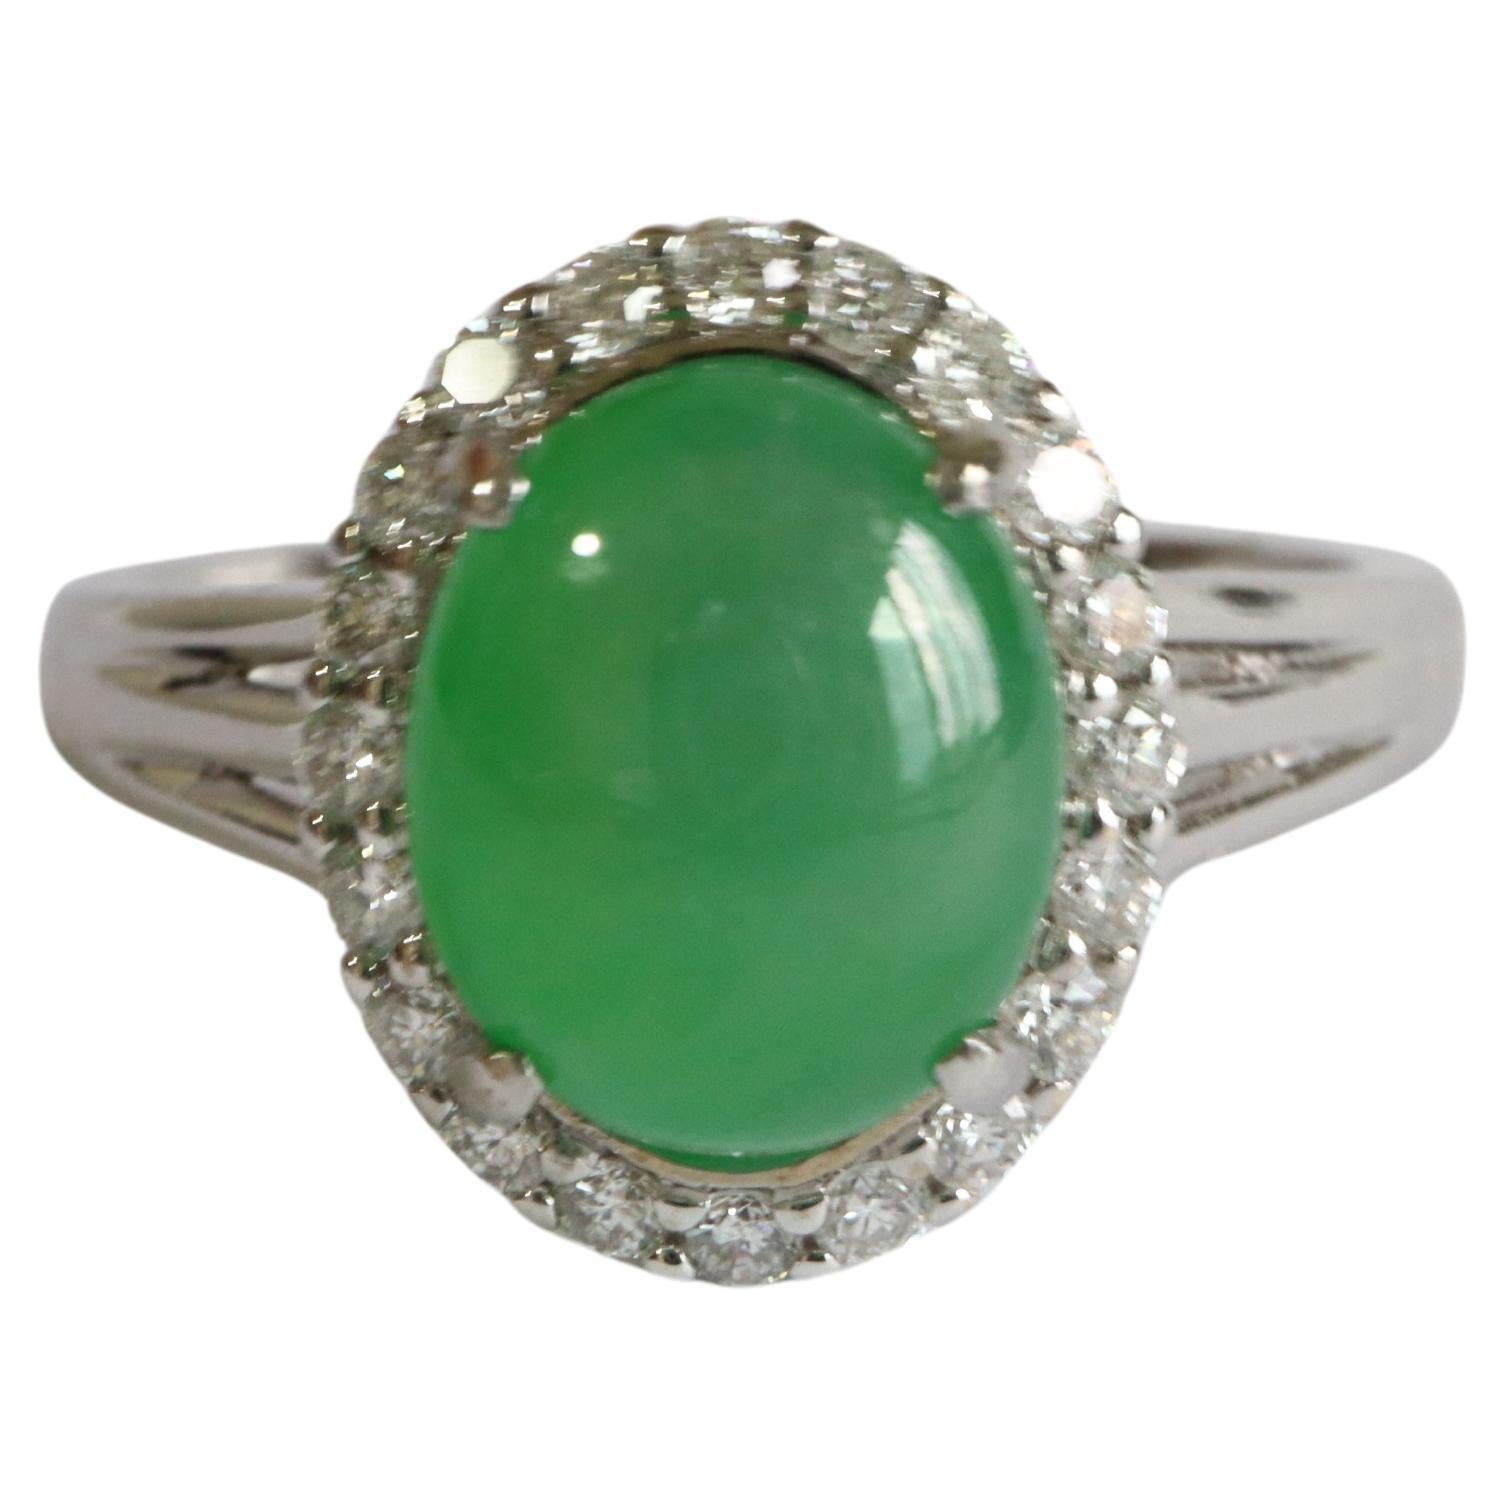 2.62ct Type A Jadeite Jade and Natural Diamond ring in 18k solid gold